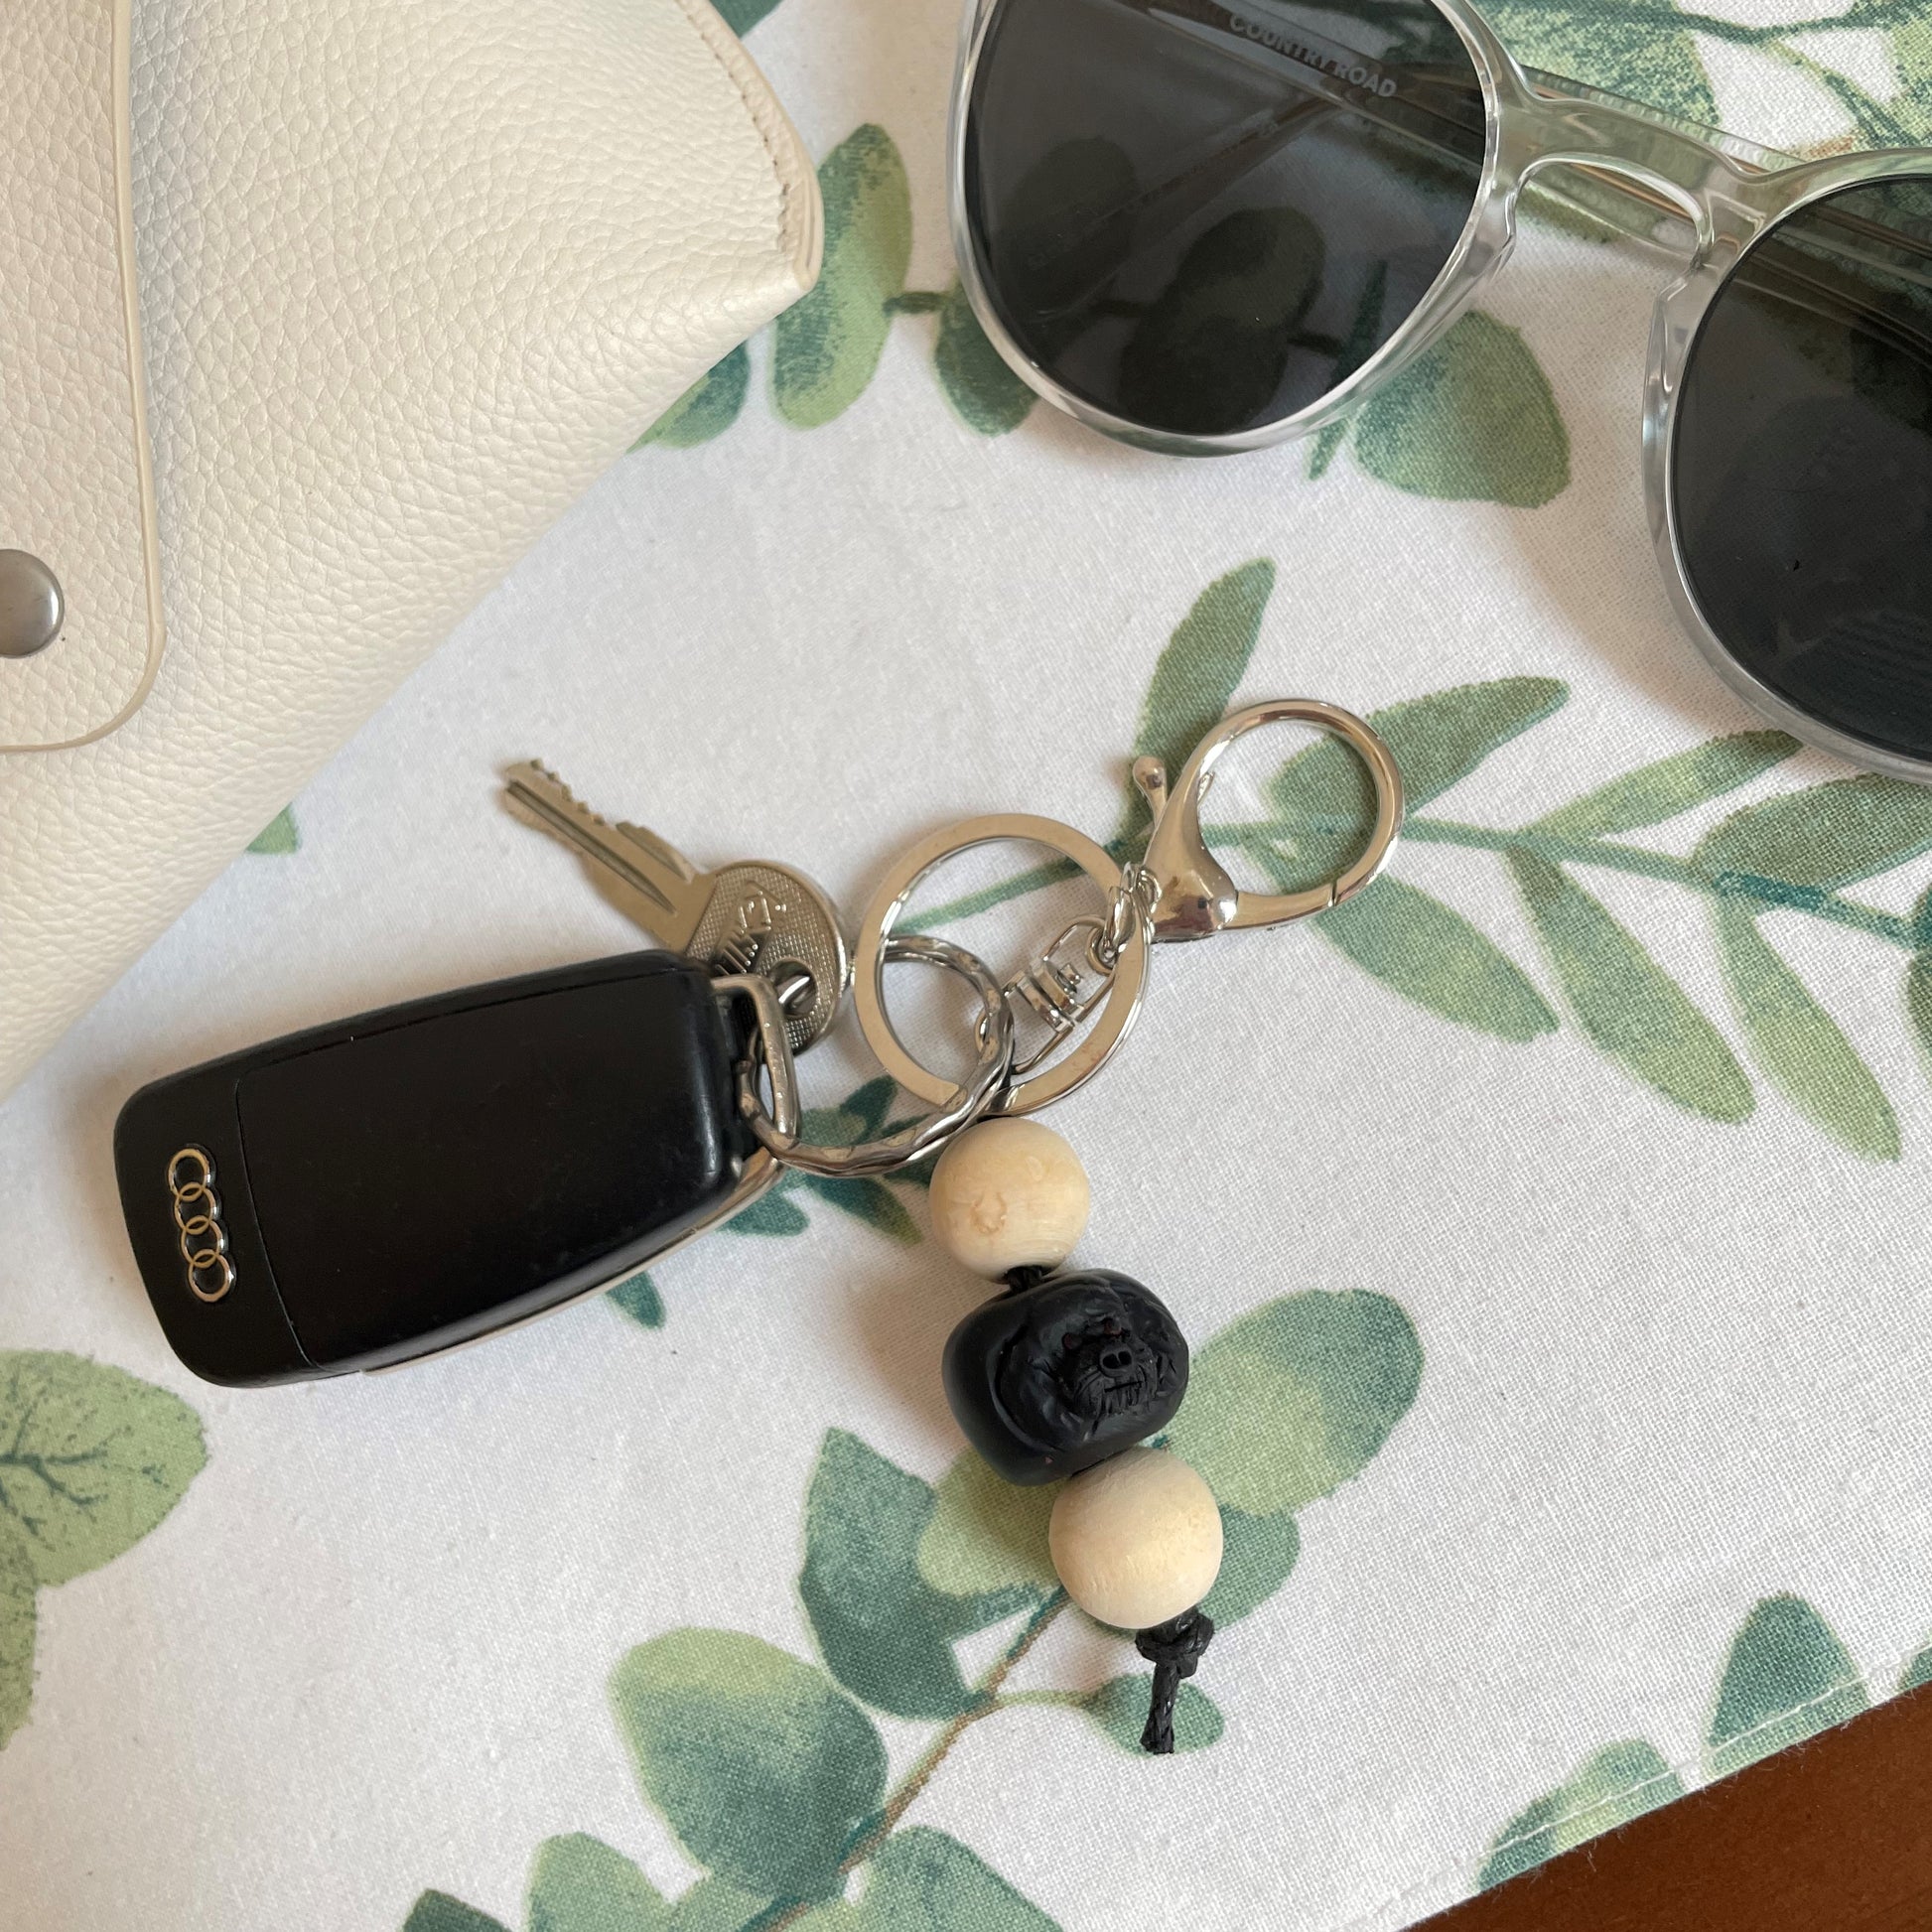 Handmade timber and polymer clay black poodle keychain on a tablecloth beside sunglasses and a case.